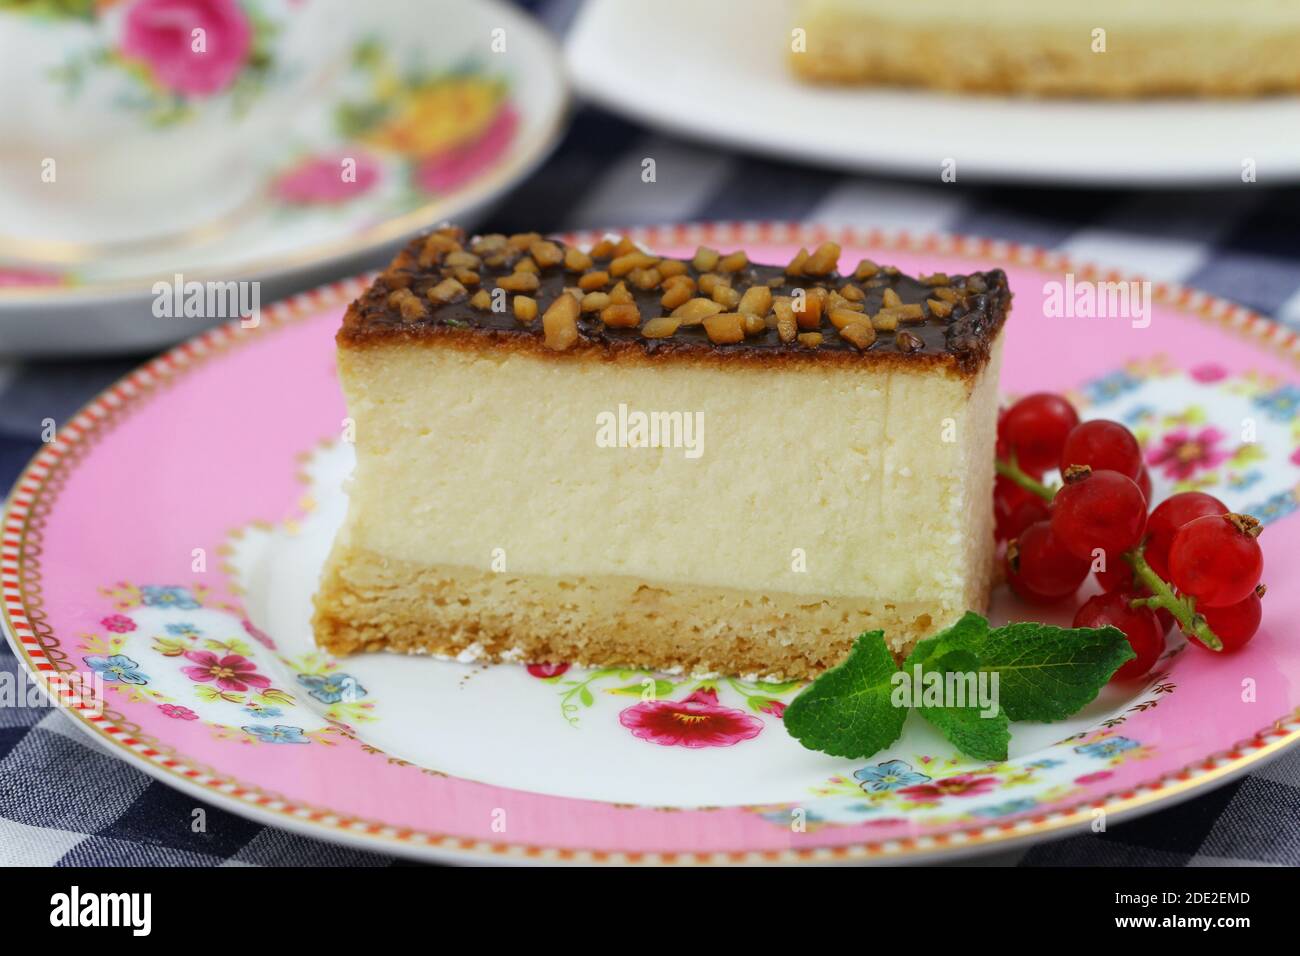 Slice of delicious baked cheesecake with chocolate topping sprinkled with nuts Stock Photo